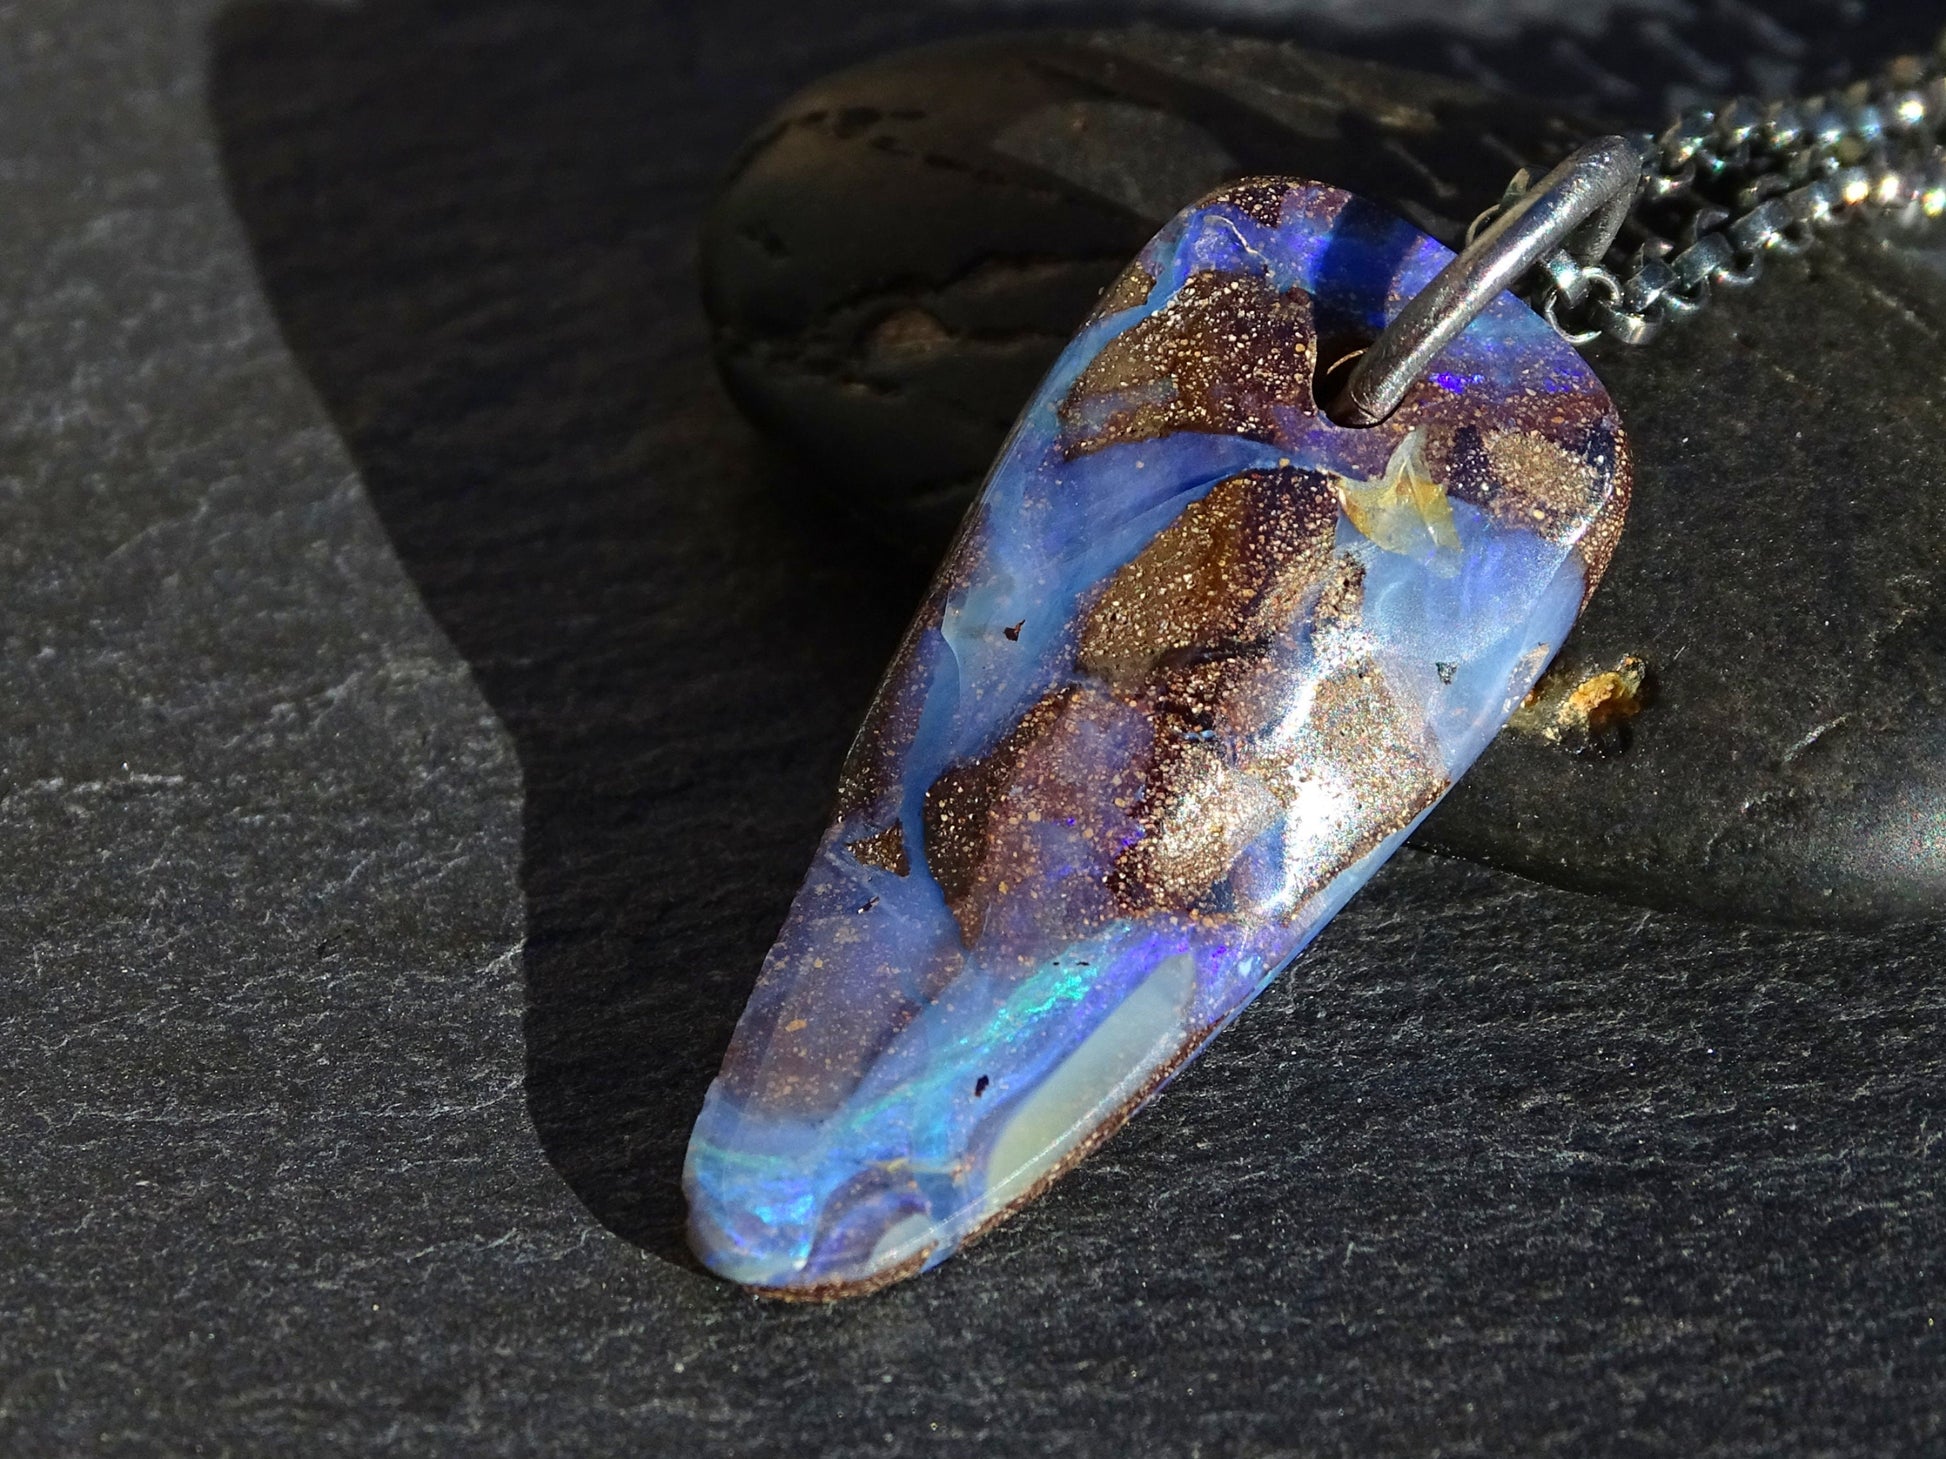 Boulder opal pendant silver, opal necklace silver, Australian opal pendant for women, opal jewelry birthstone gift for her, anniversary gift - CrazyAss Jewelry Designs